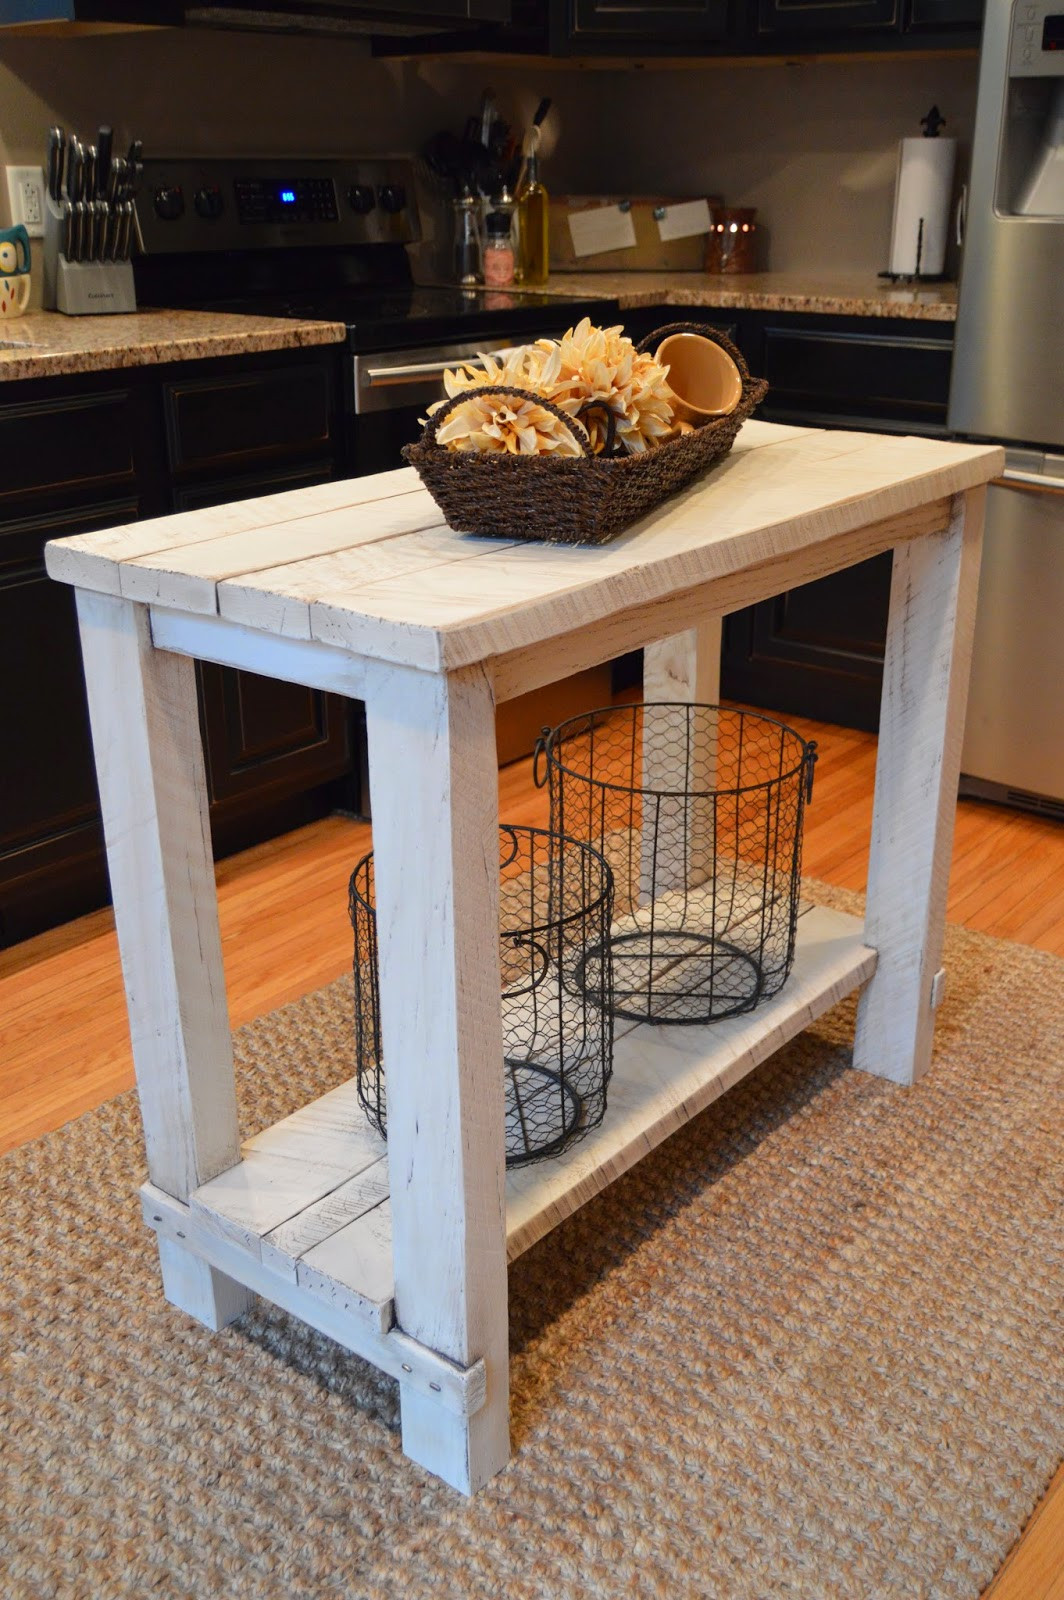 Diy Small Kitchen Ideas
 15 Gorgeous DIY Kitchen Islands For Every Bud